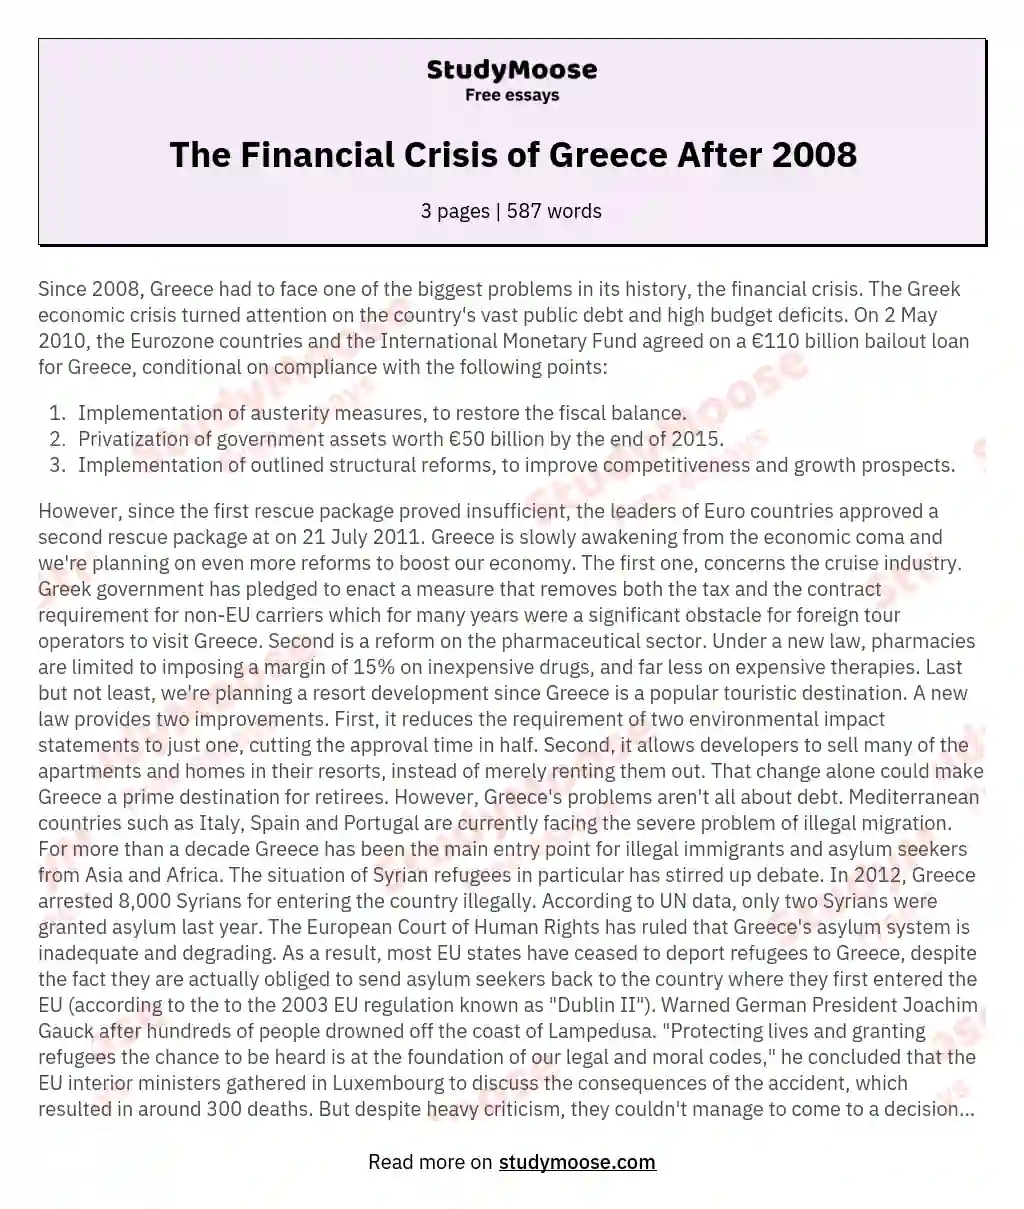 The Financial Crisis of Greece After 2008 essay